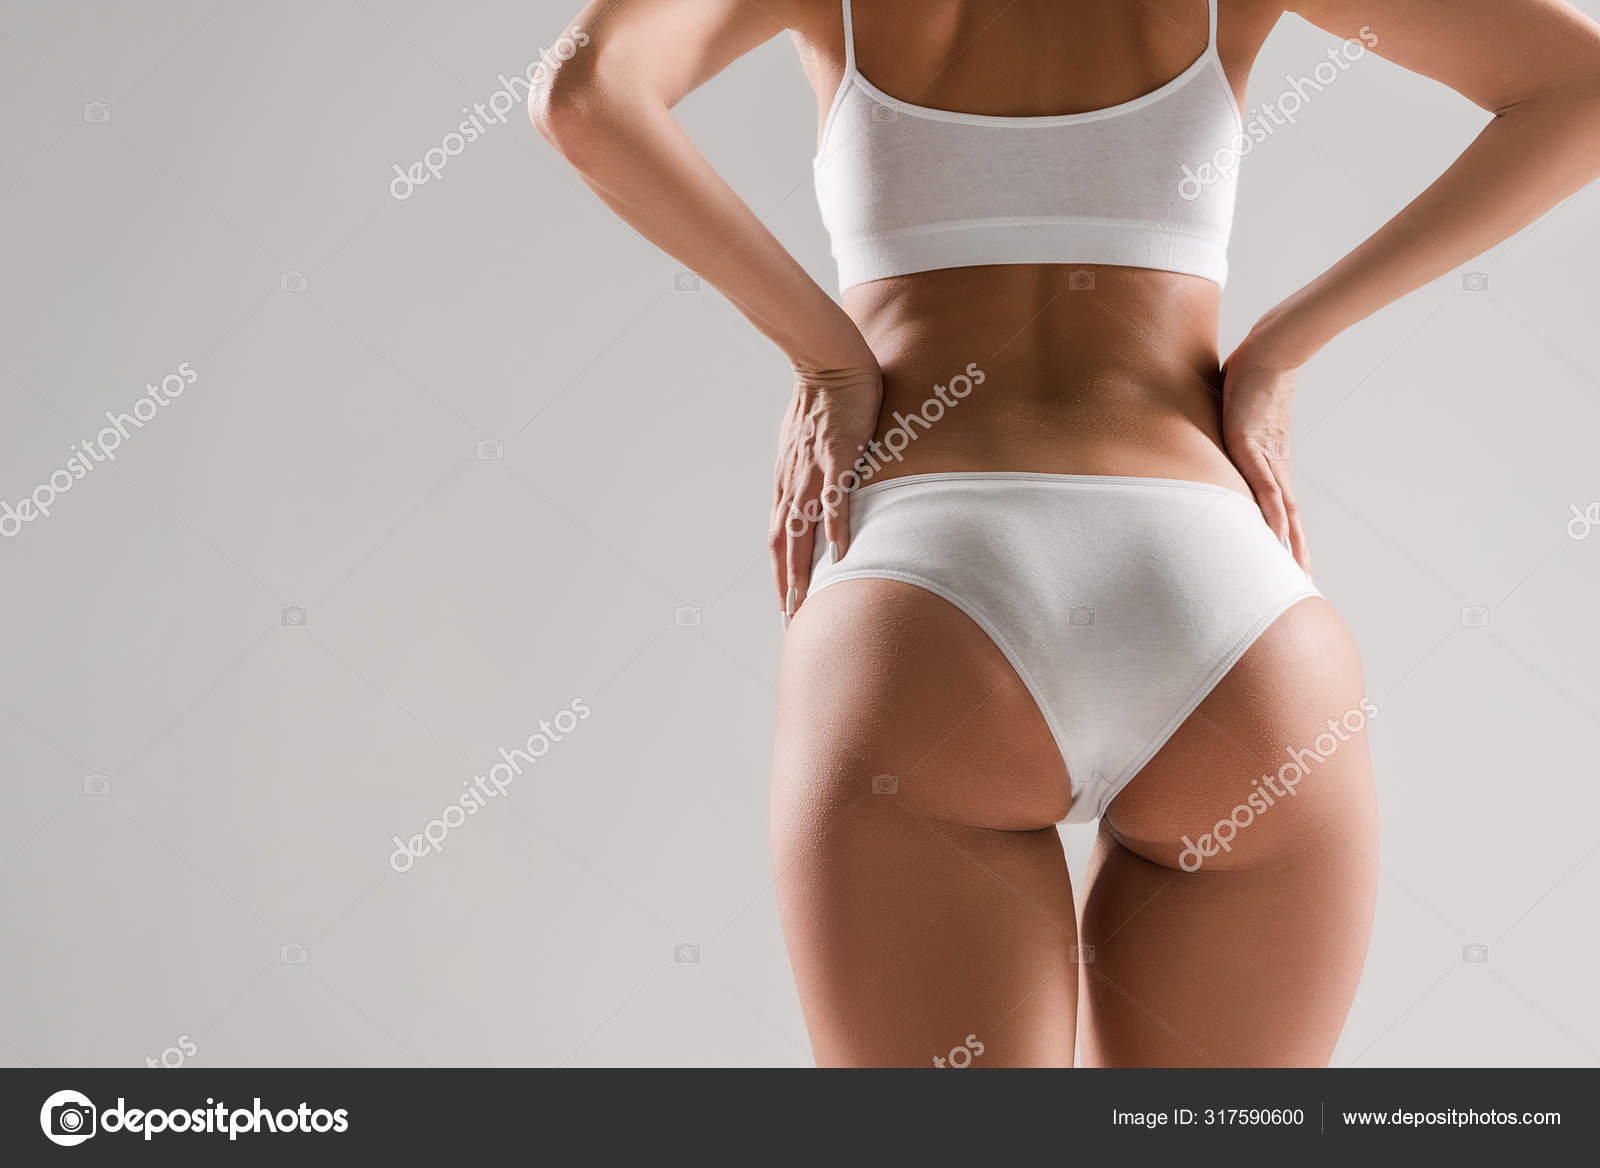 Athletic Underwear View from Behind Stock Image - Image of hips, lingerie:  134094327